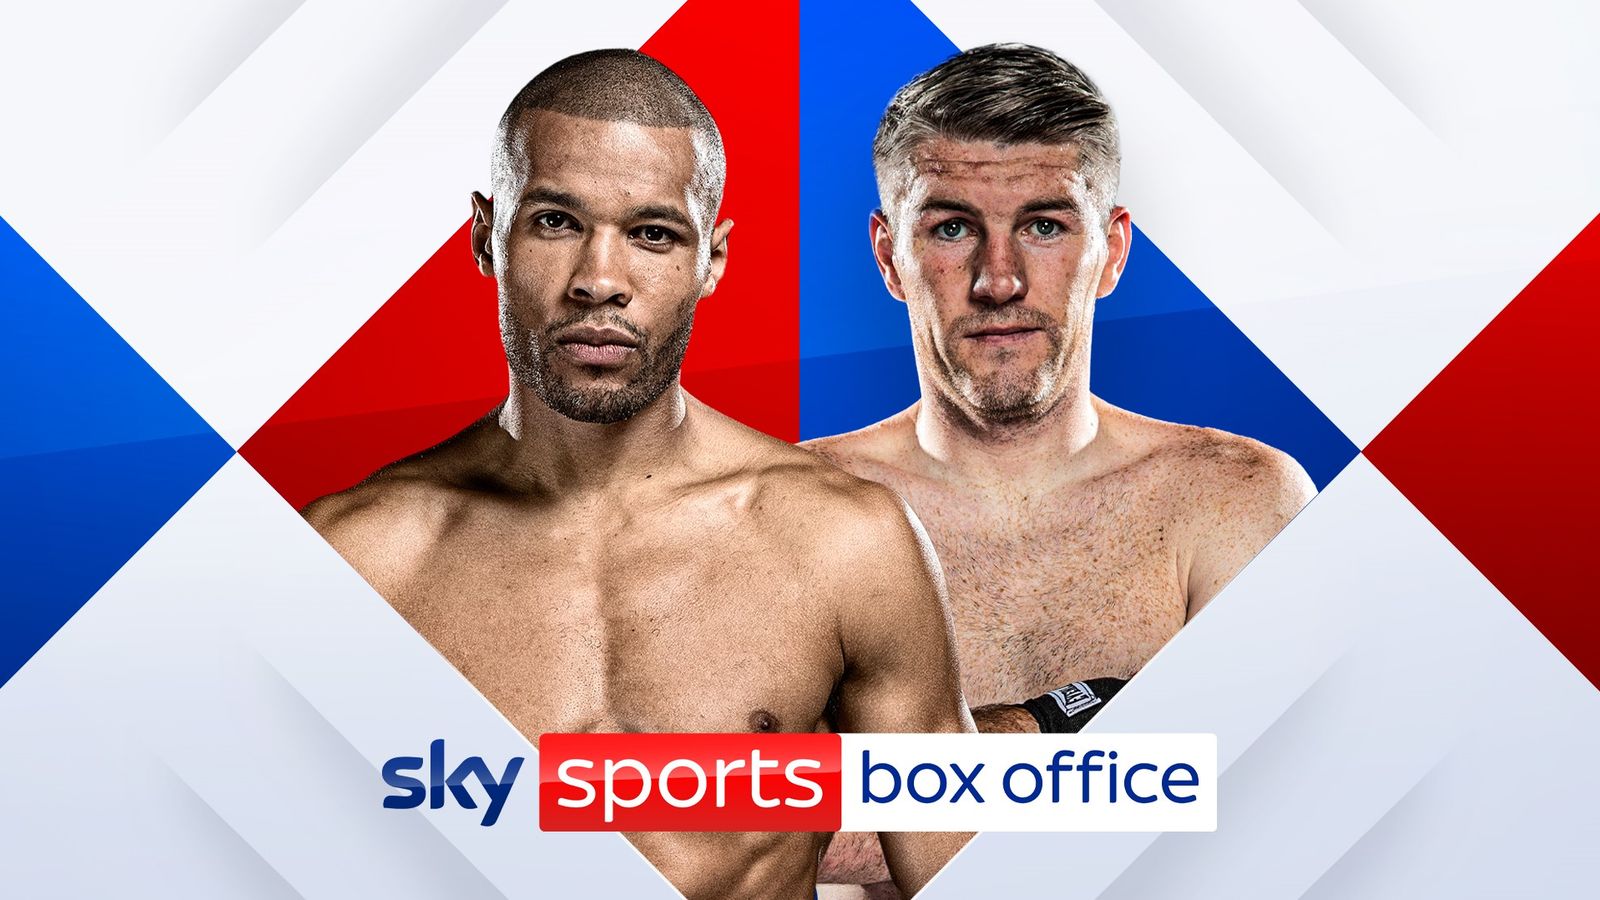 Chris Eubank Jr vs Liam Smith live on Sky Sports Box Office on January 21; Richard Riakporhe and Frazer Clarke confirmed for undercard Boxing News Sky Sports